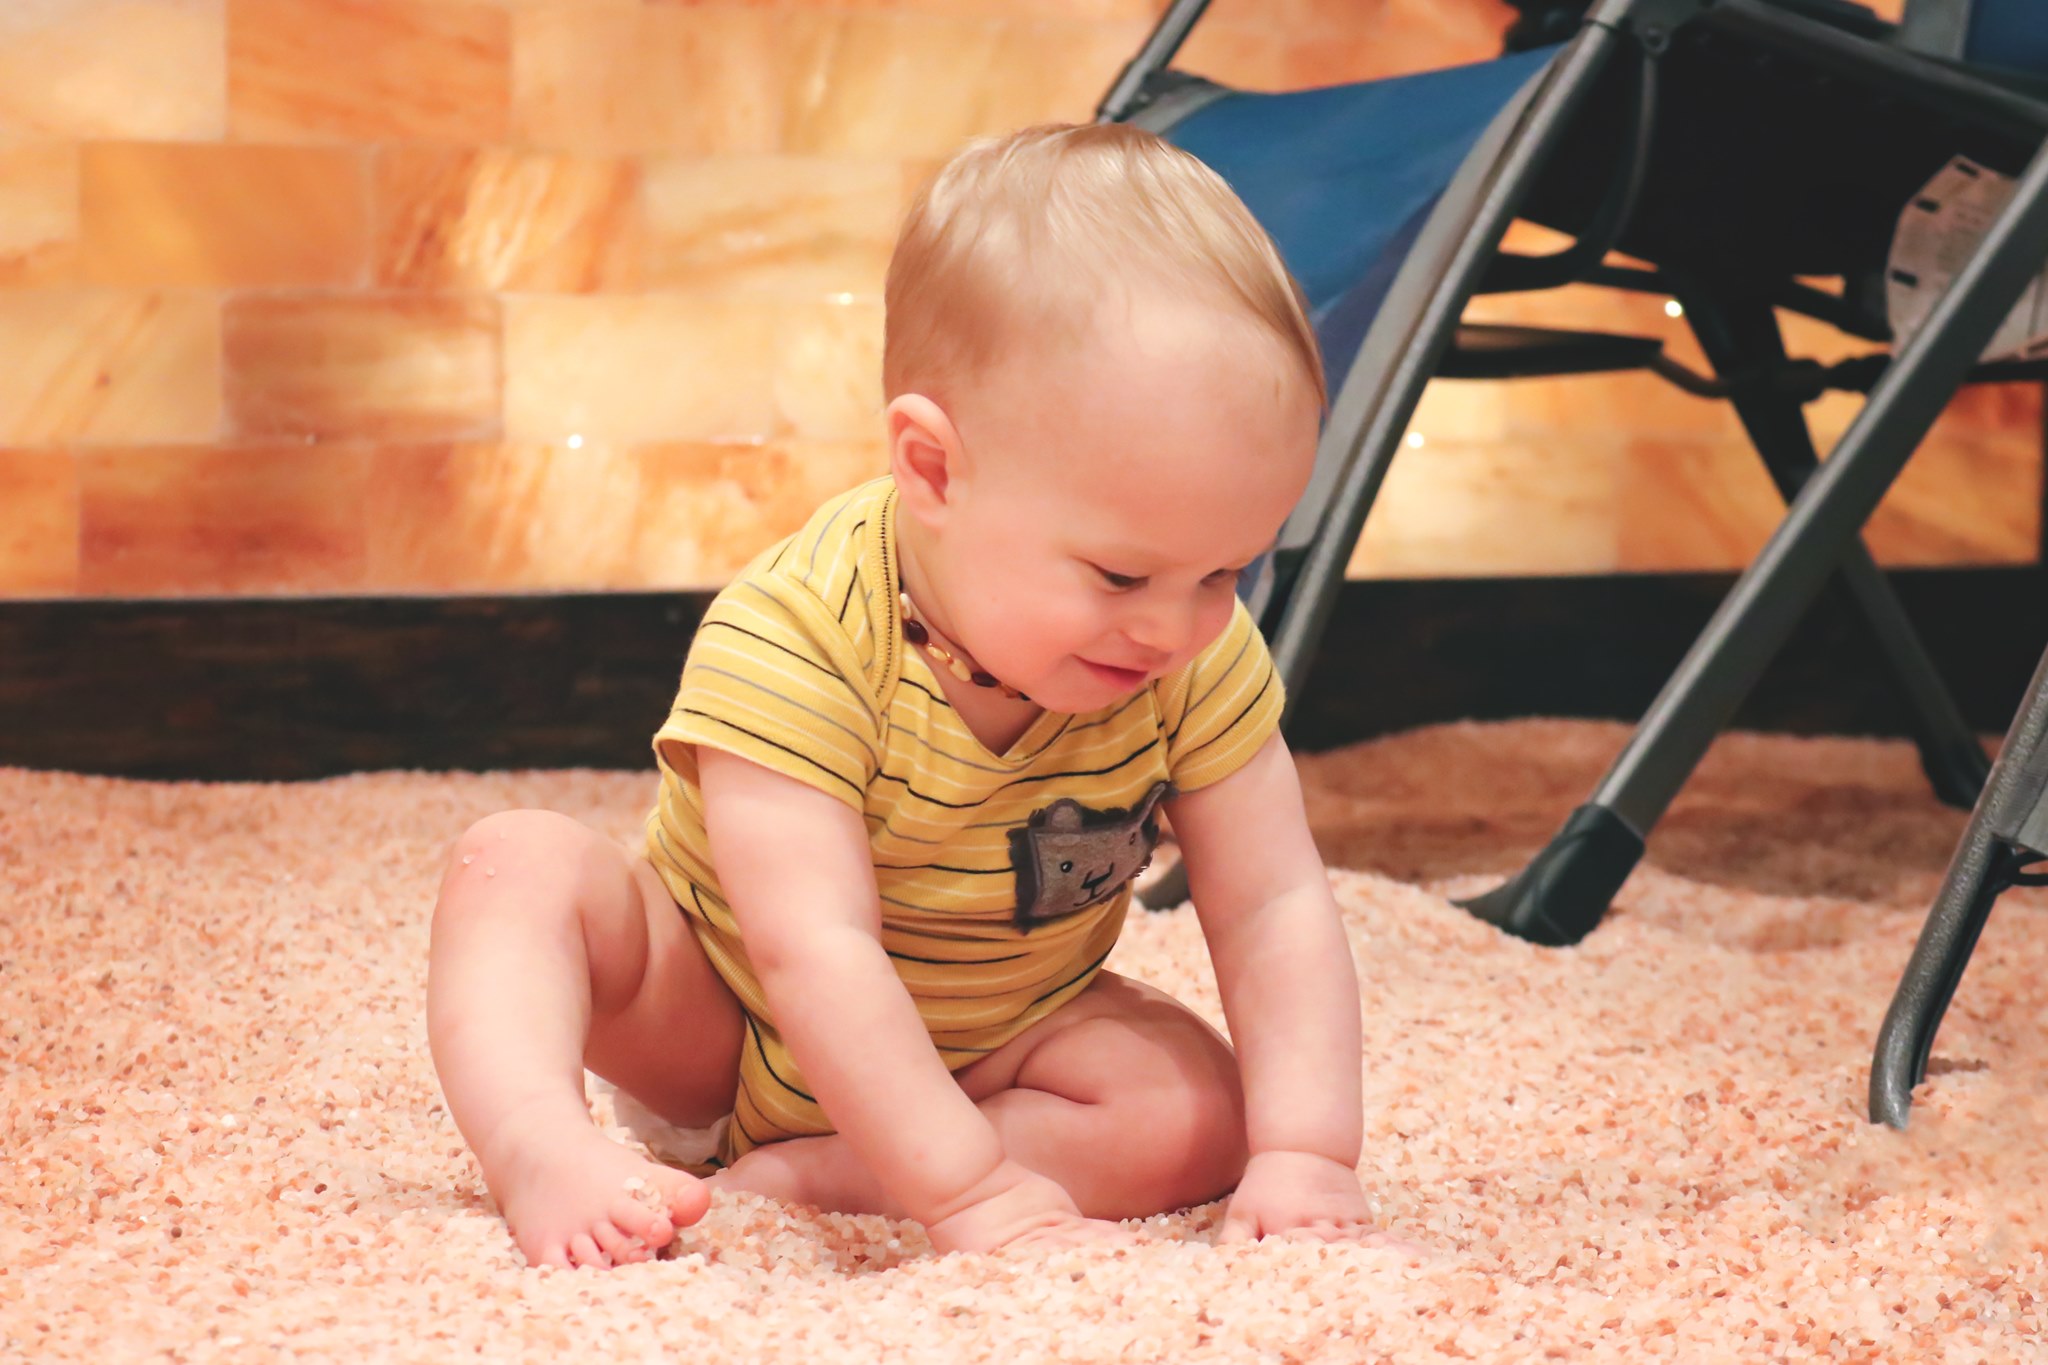 Young Baby Sitting On A Himalayan Salt Covered Floor.